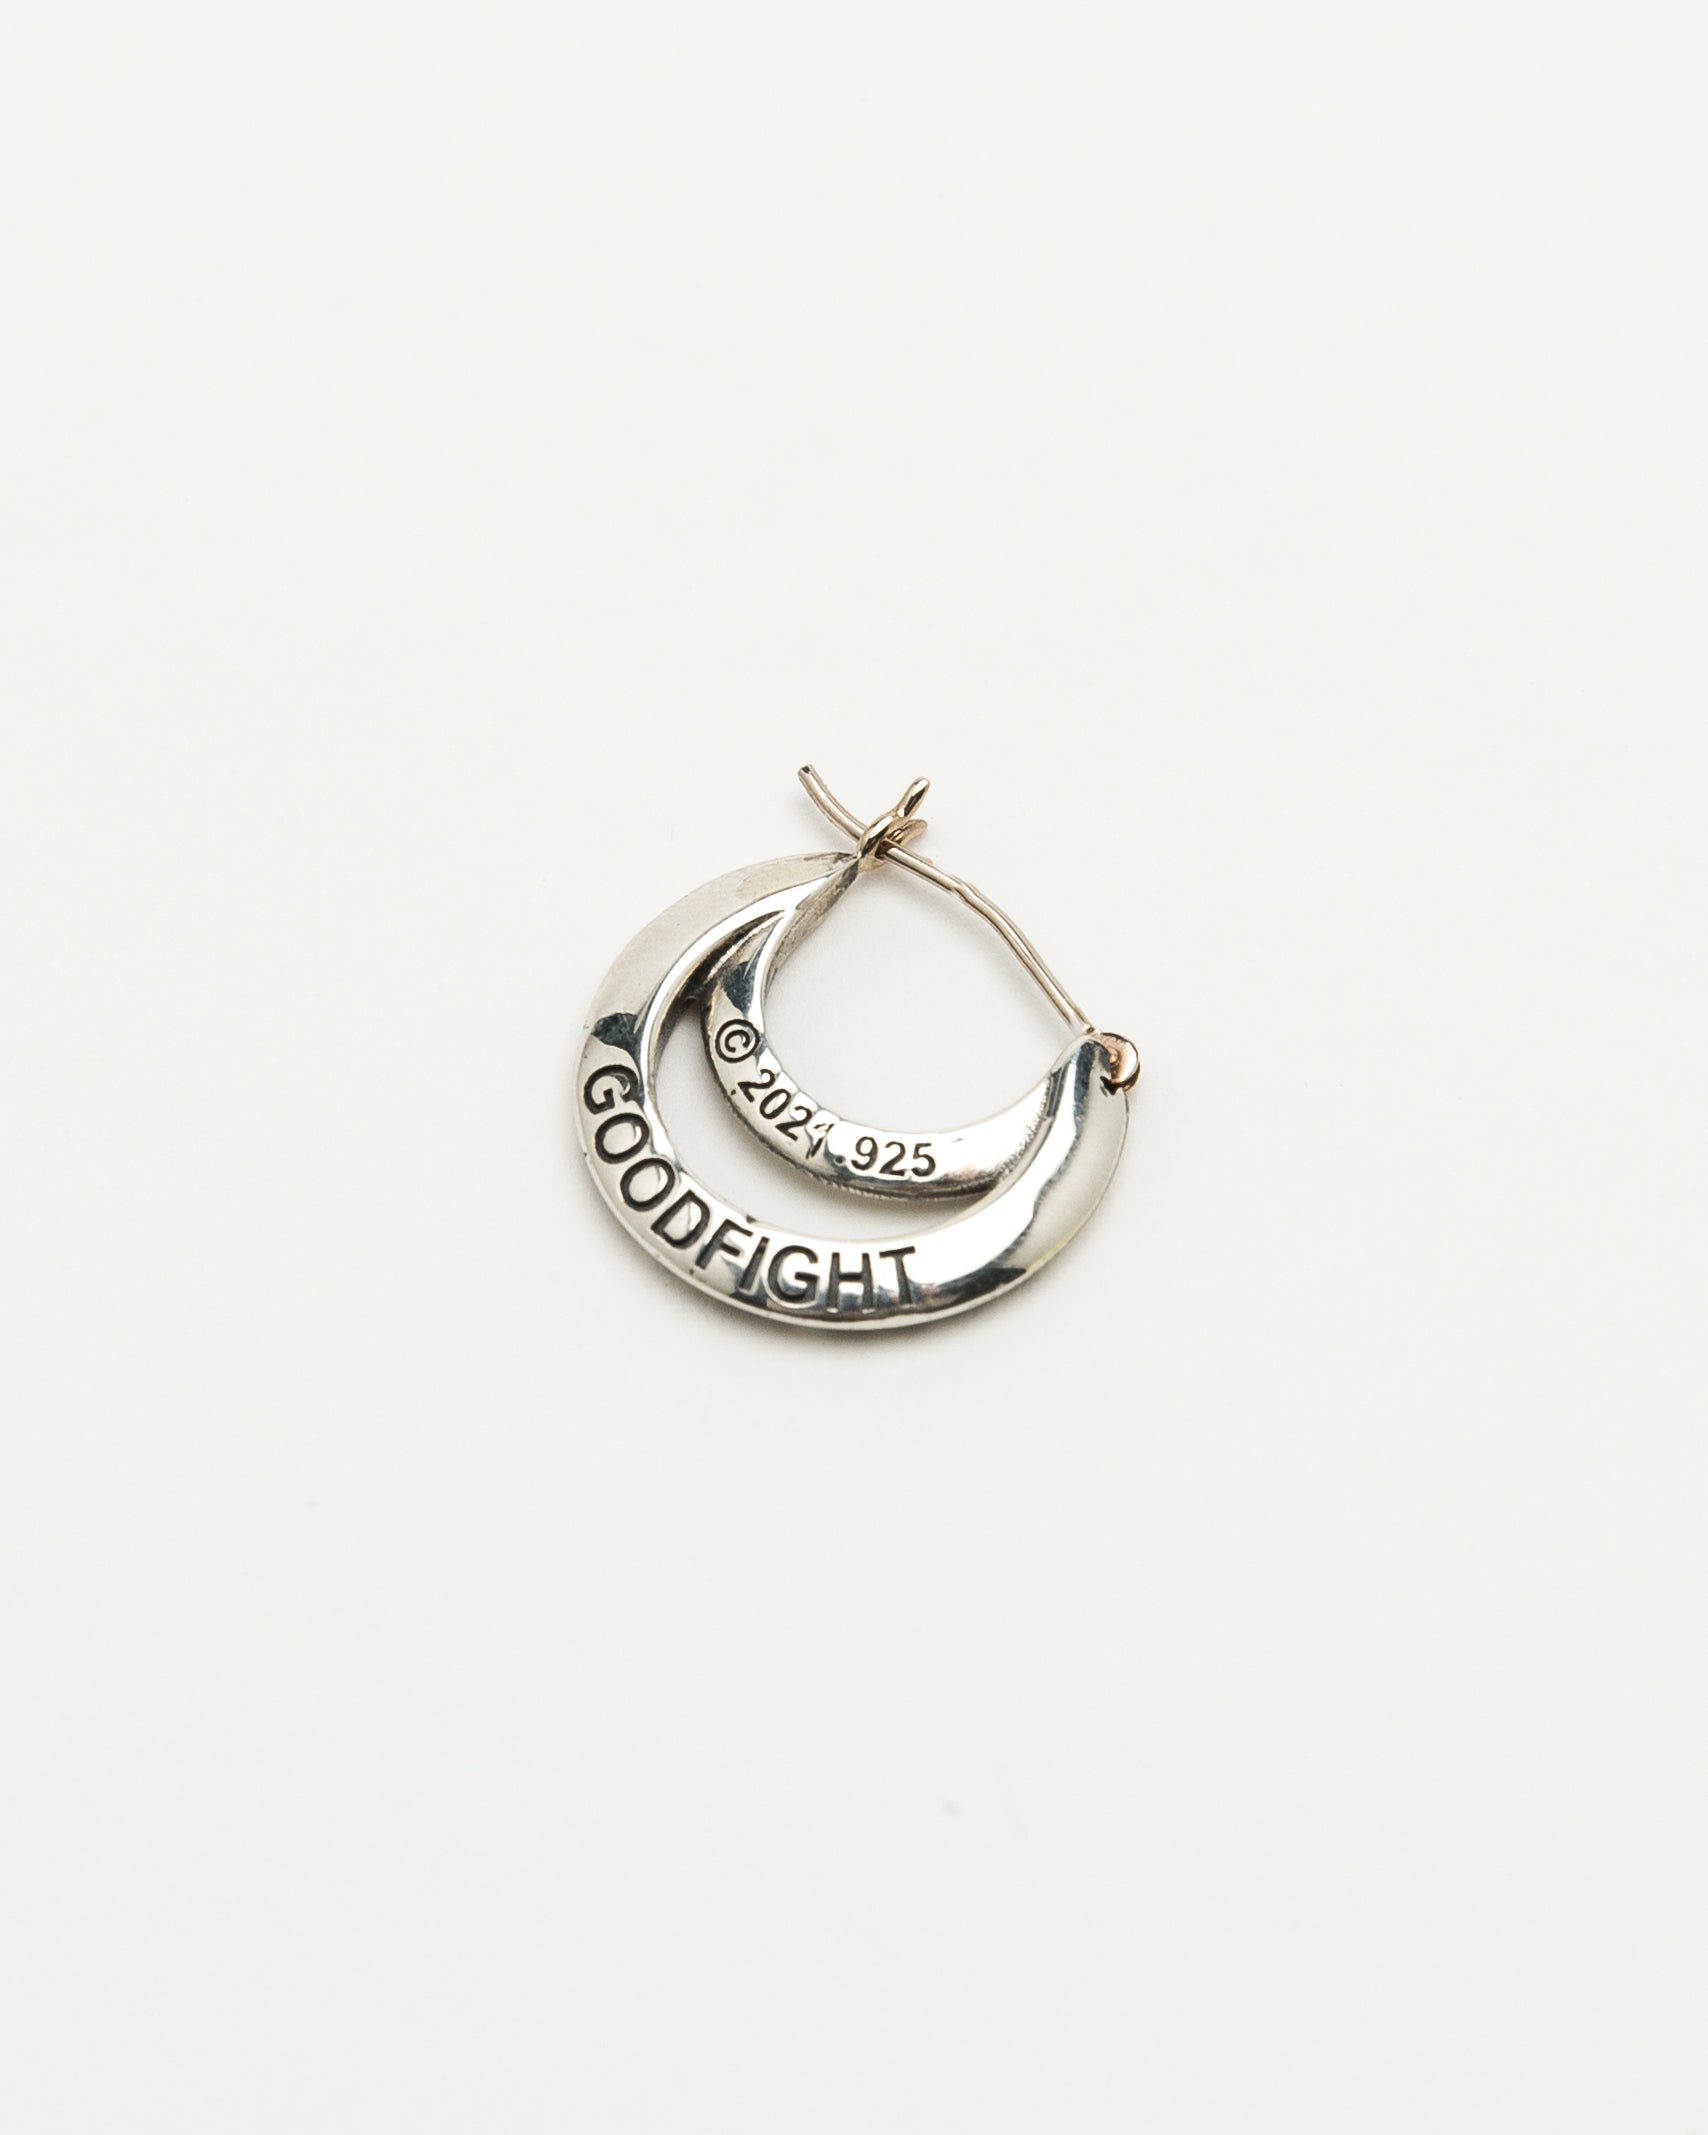 GDFHT x Good Art Hlywd 925 Double Crescent Earring in Sterling